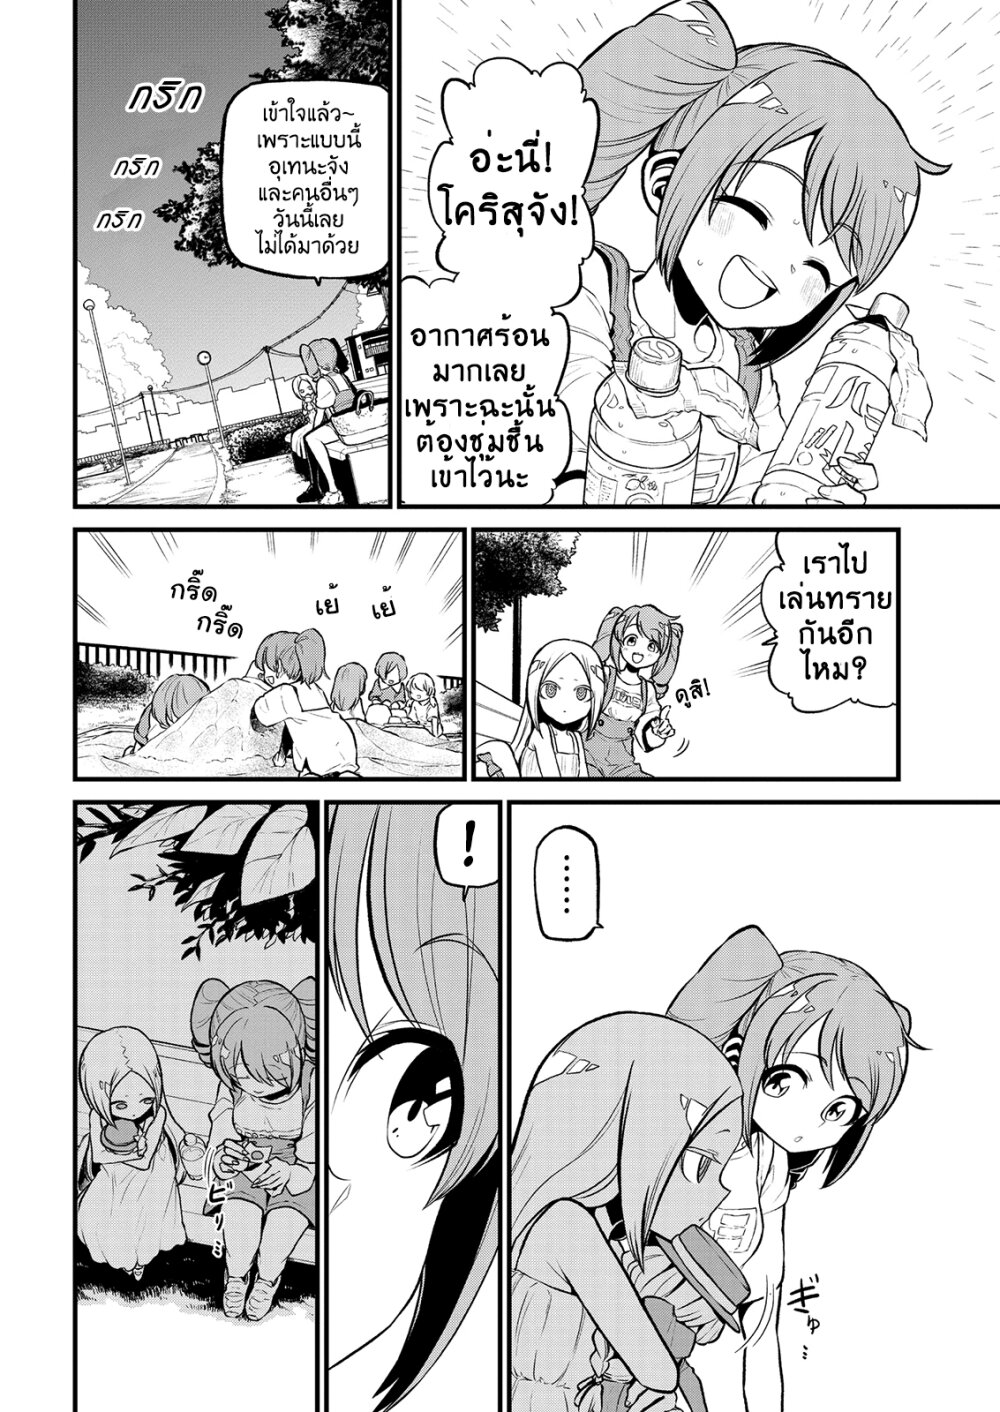 Looking up to Magical Girls 26 (4)